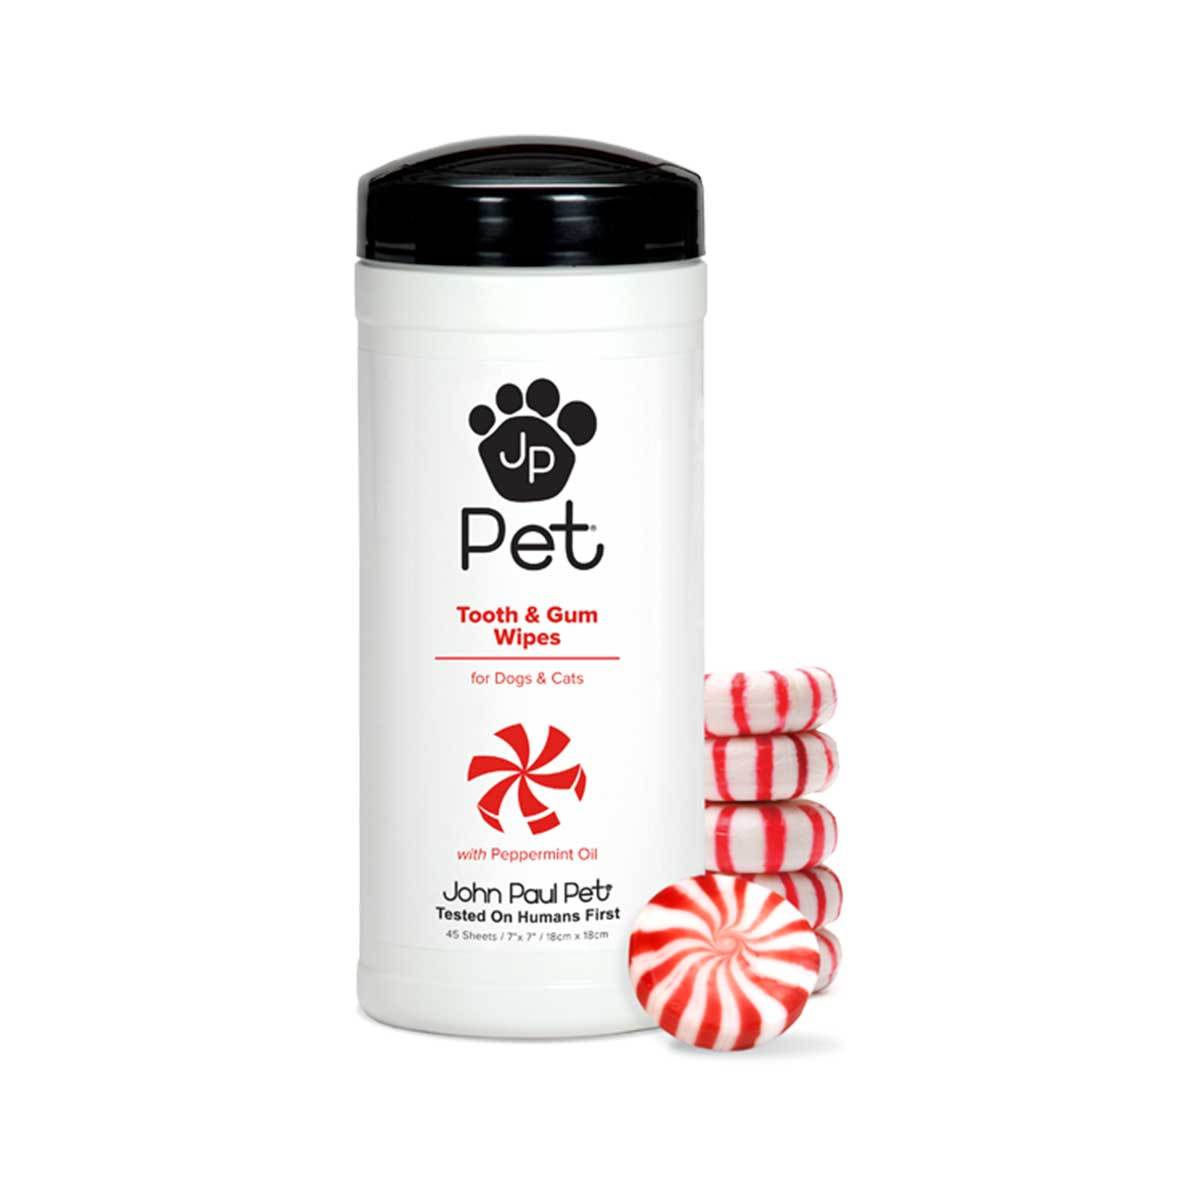 John Paul Pet Tooth & Gum Wipes with Peppermint Oil | Pawlicious & Company